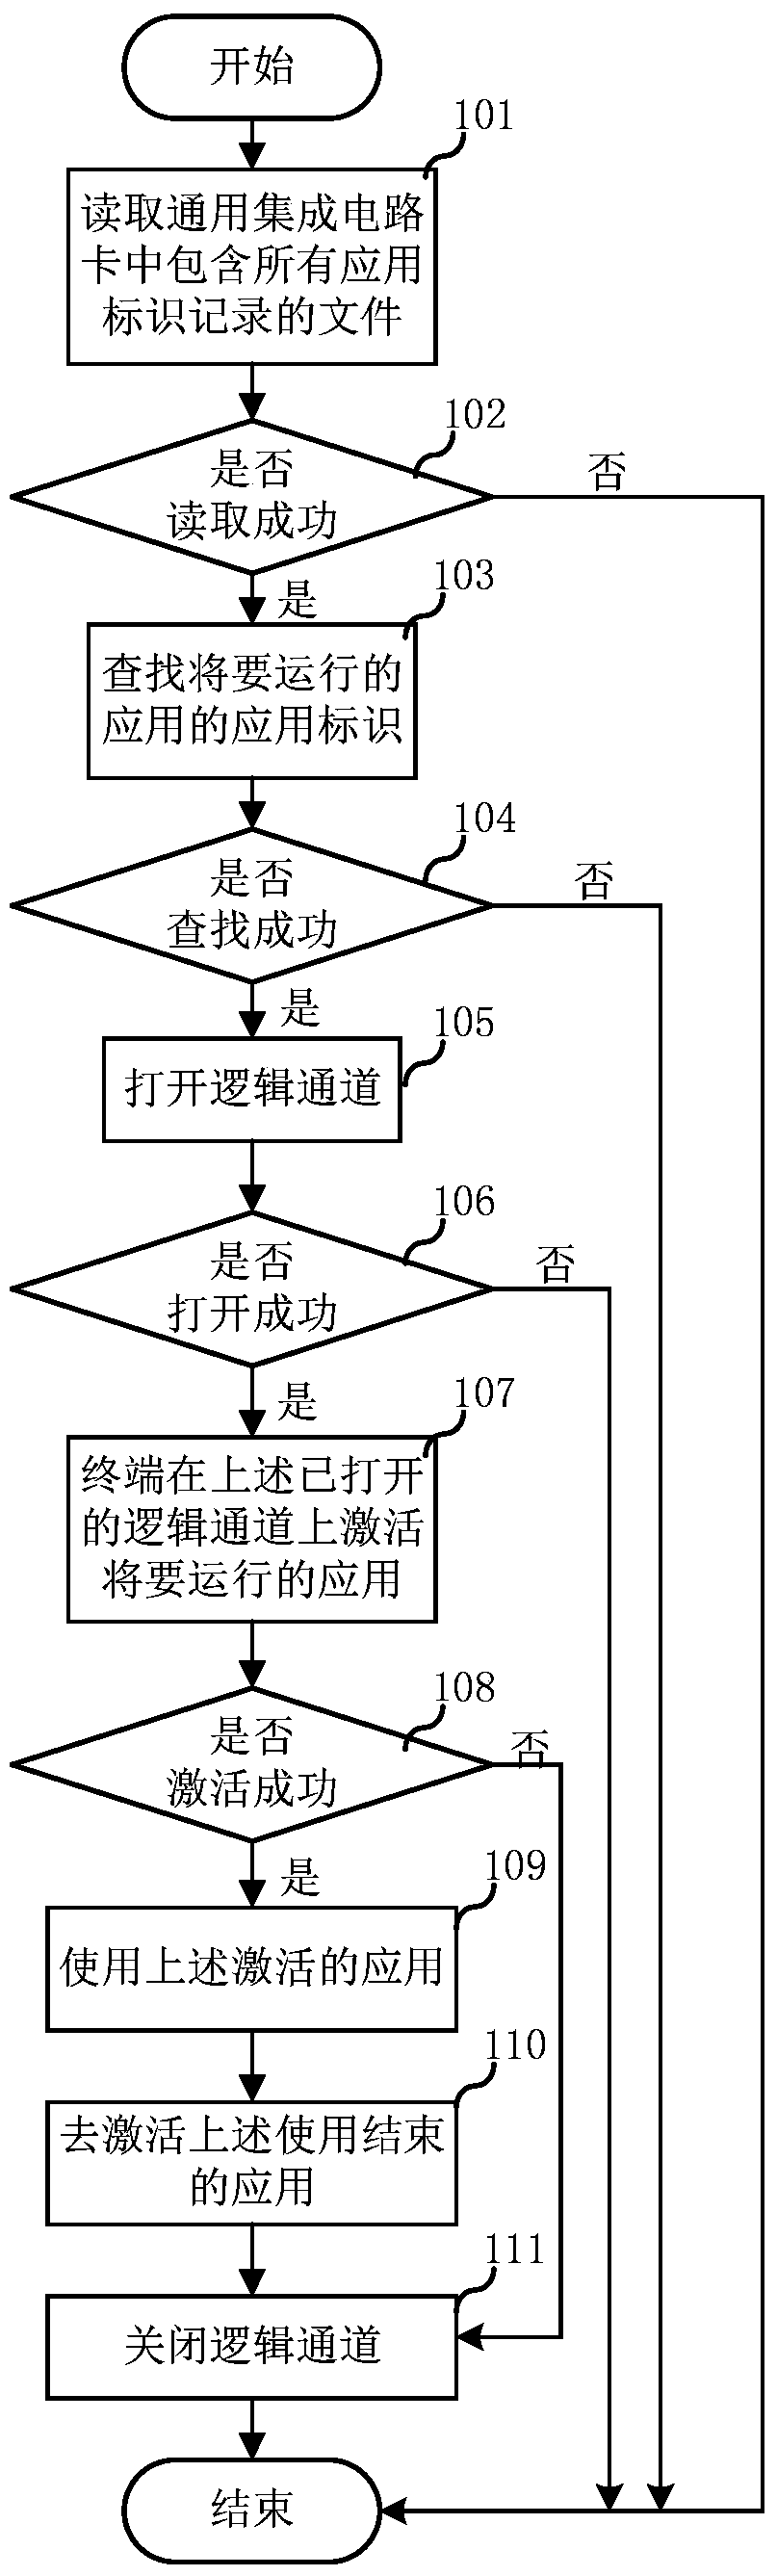 Operation method and system for dynamic mapping between applications and logical channels